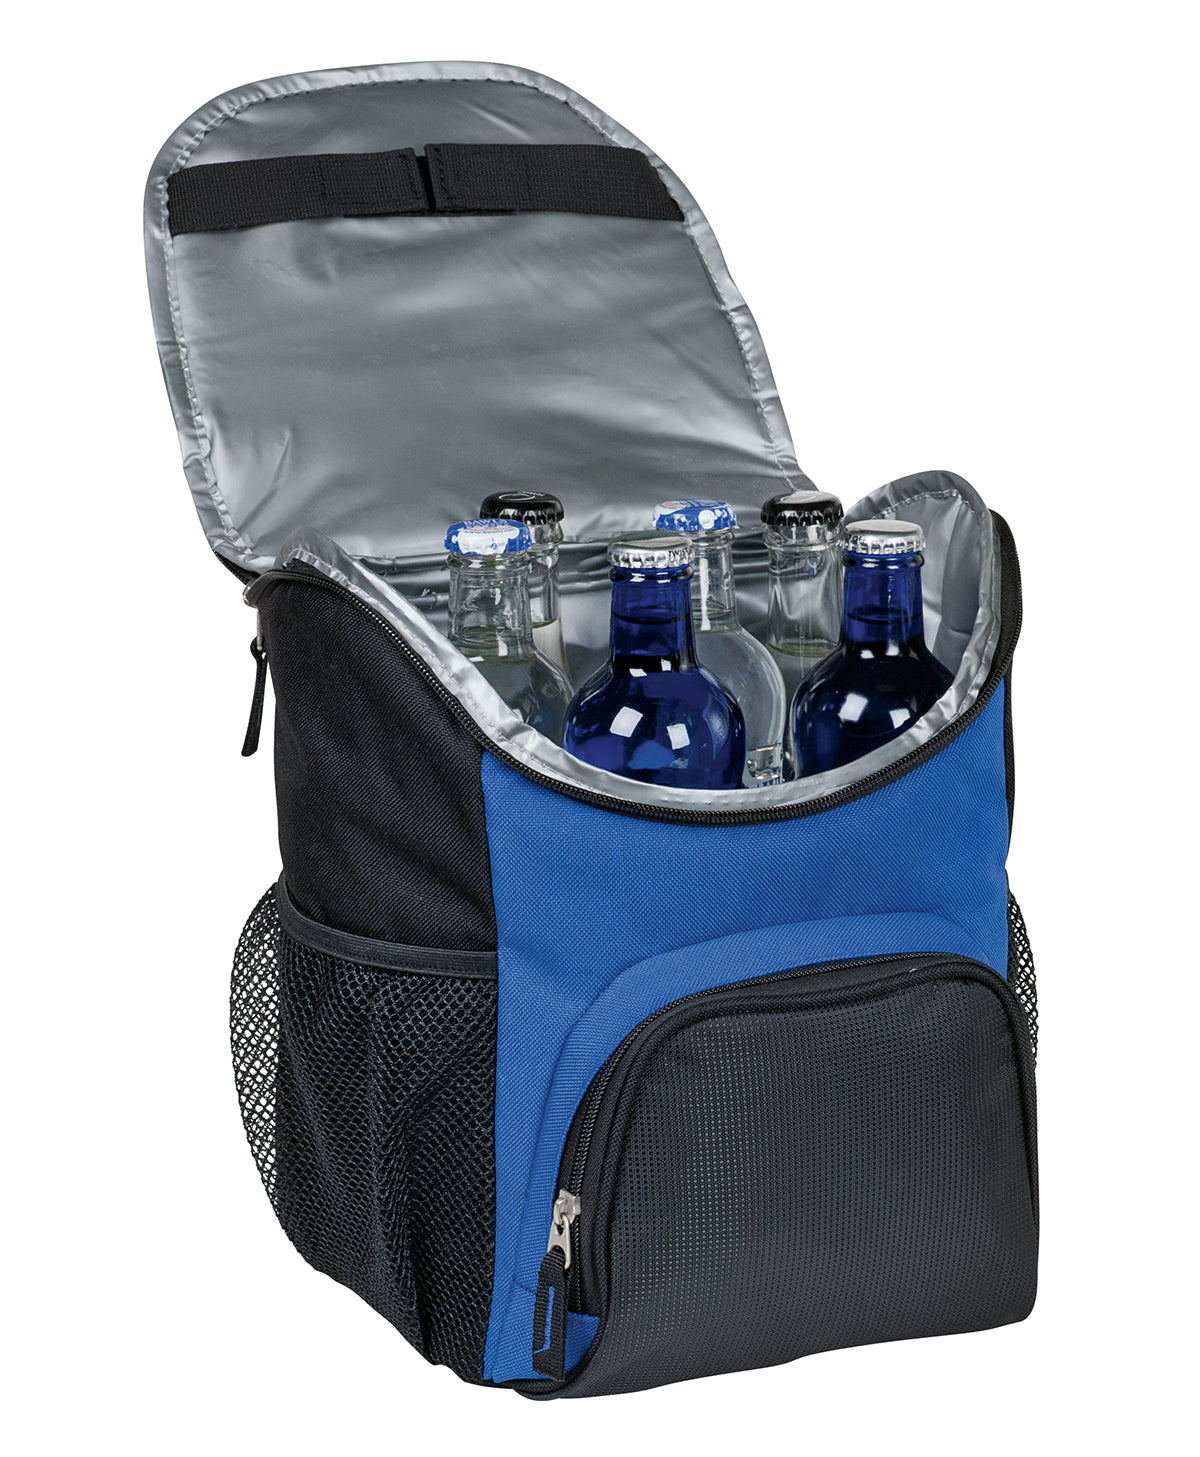 Windsor - OGIO Chill 6-12 Can Cooler - Royal (408112) - Southern Grace Creations